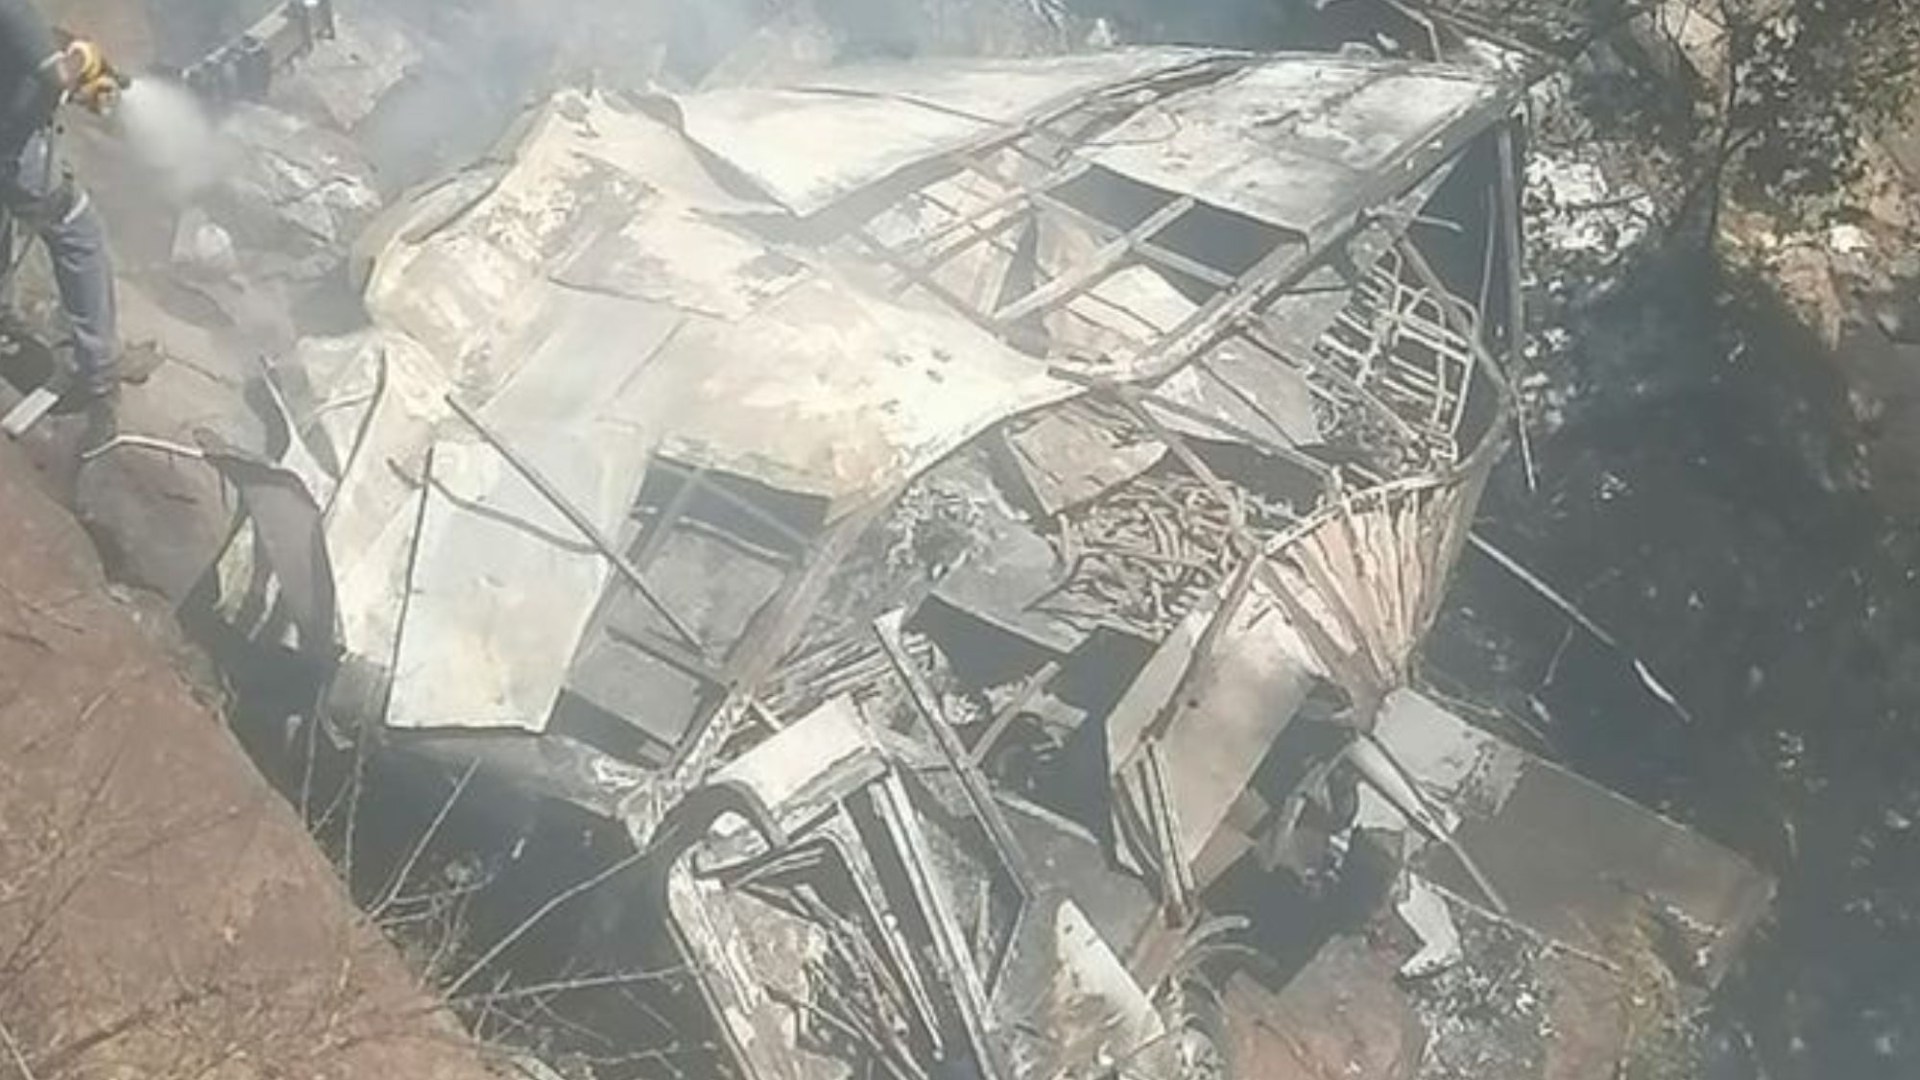 Tragic South Africa Bus Crash: 45 Killed in Fiery Bridge Plunge, Child Miraculously Survives